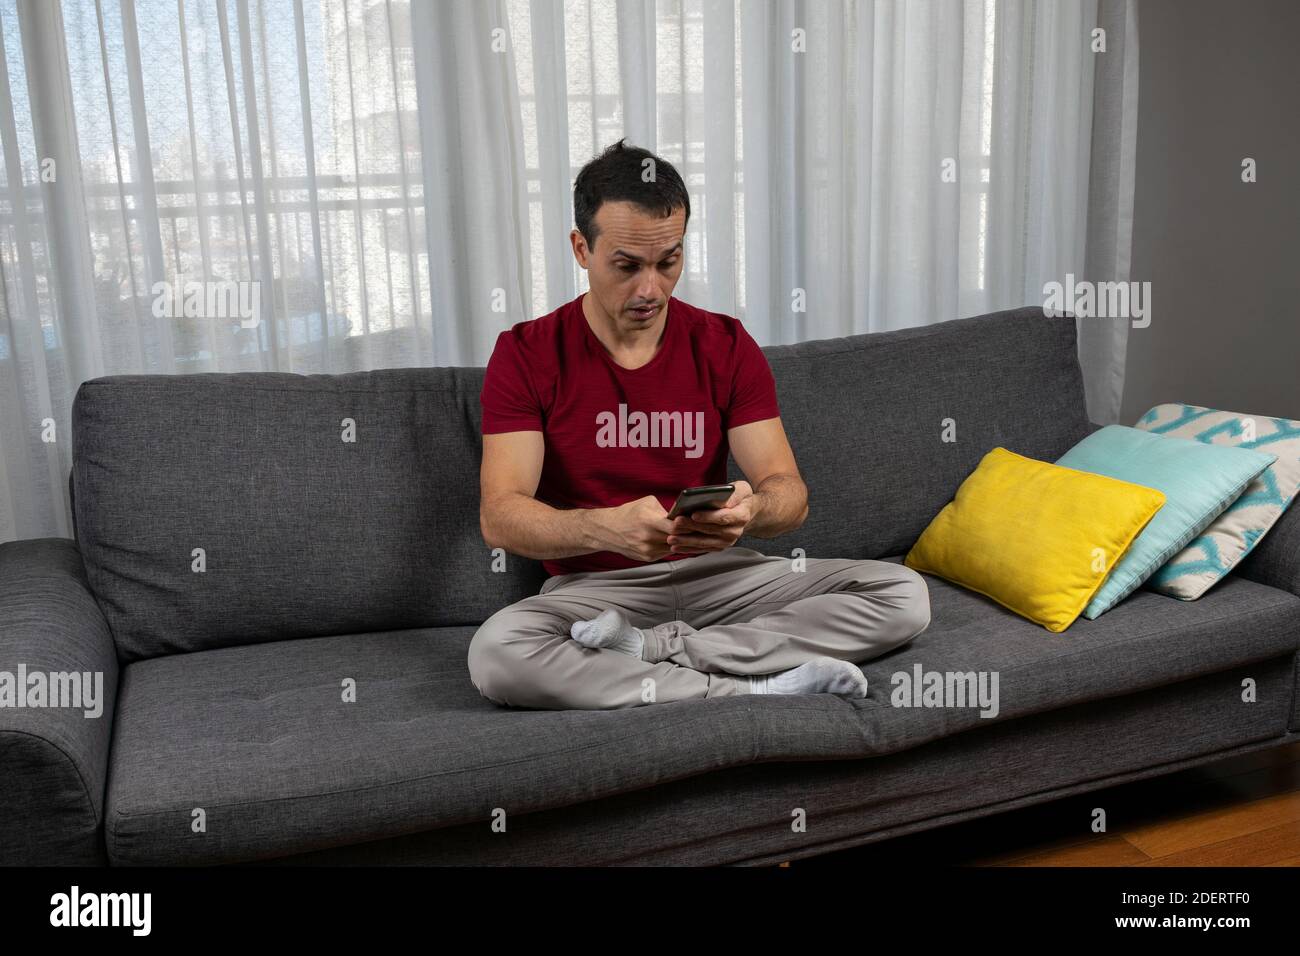 Mature man (44 years old) sitting with his legs crossed on the sofa and very surprised to see his smartphone. Stock Photo